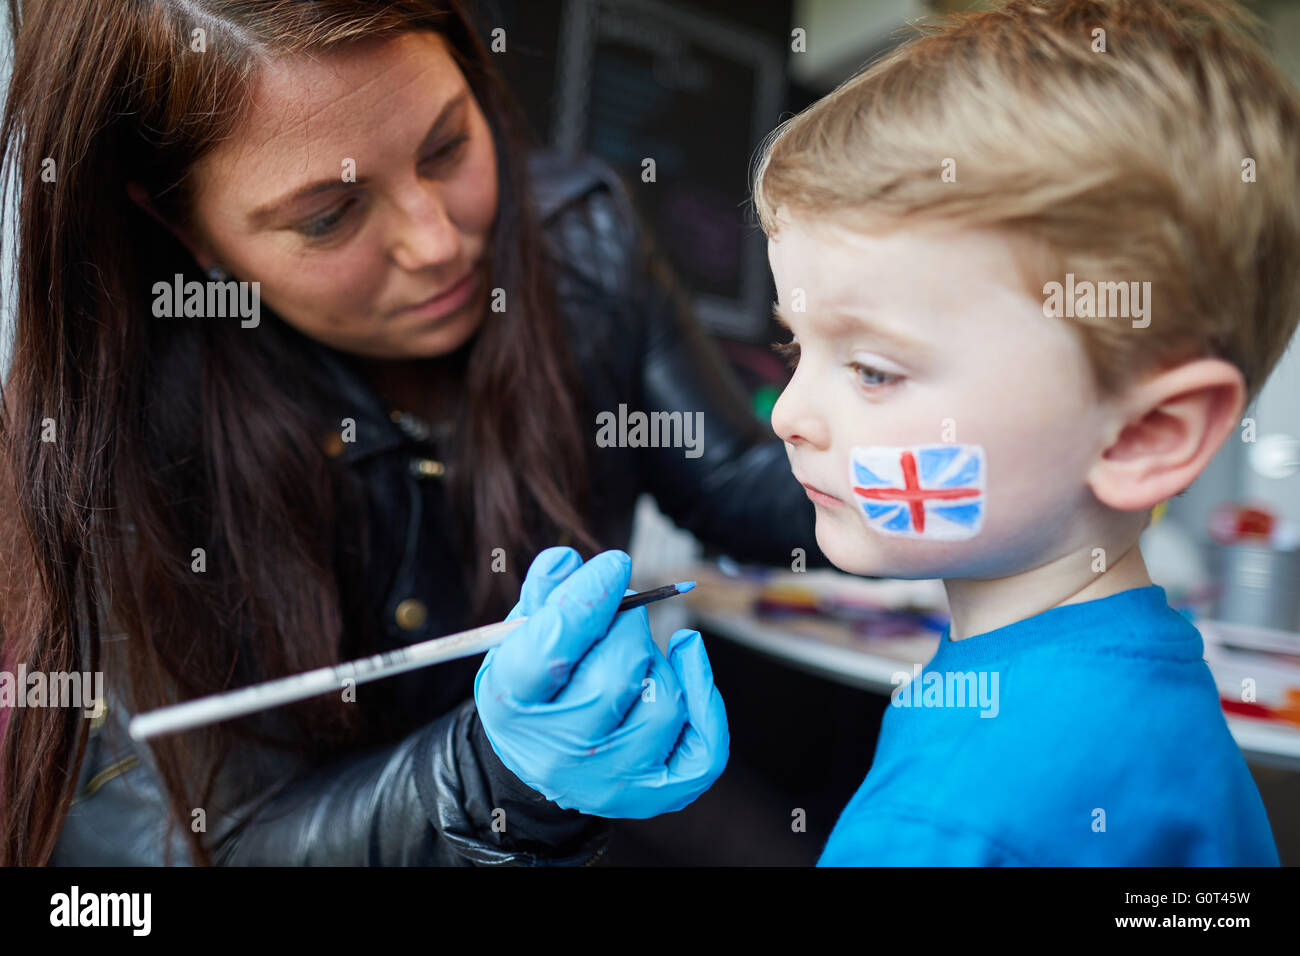 Young boy union jack flag faceprinting    Man men male his him he  lads boys Young kids children youngsters child toddlers adole Stock Photo